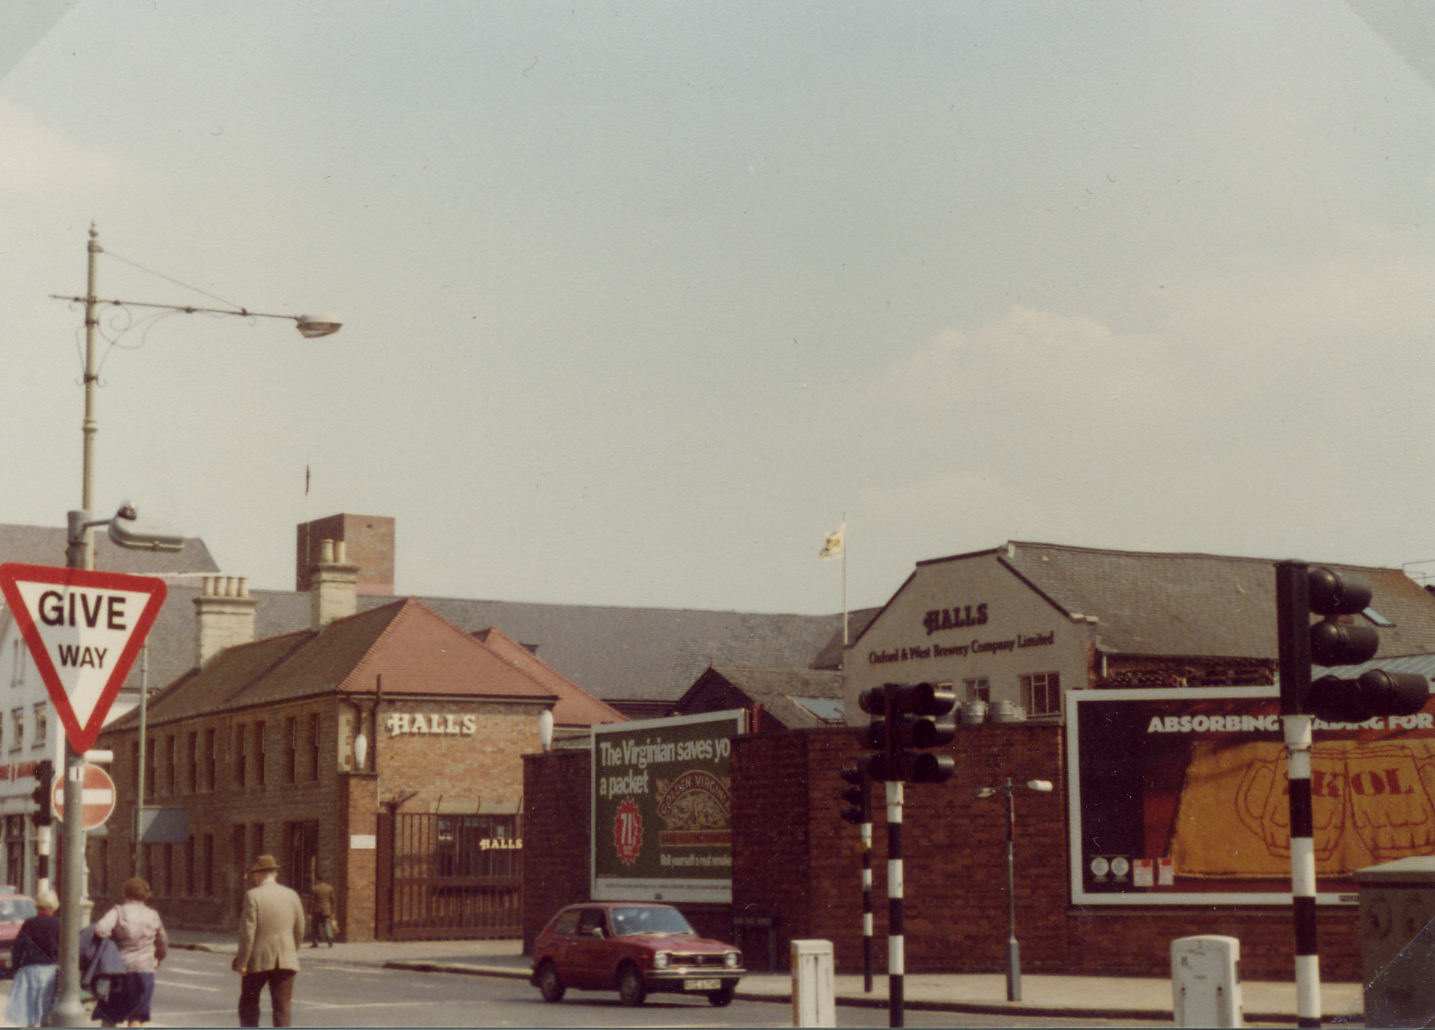 The brewery site in 1982